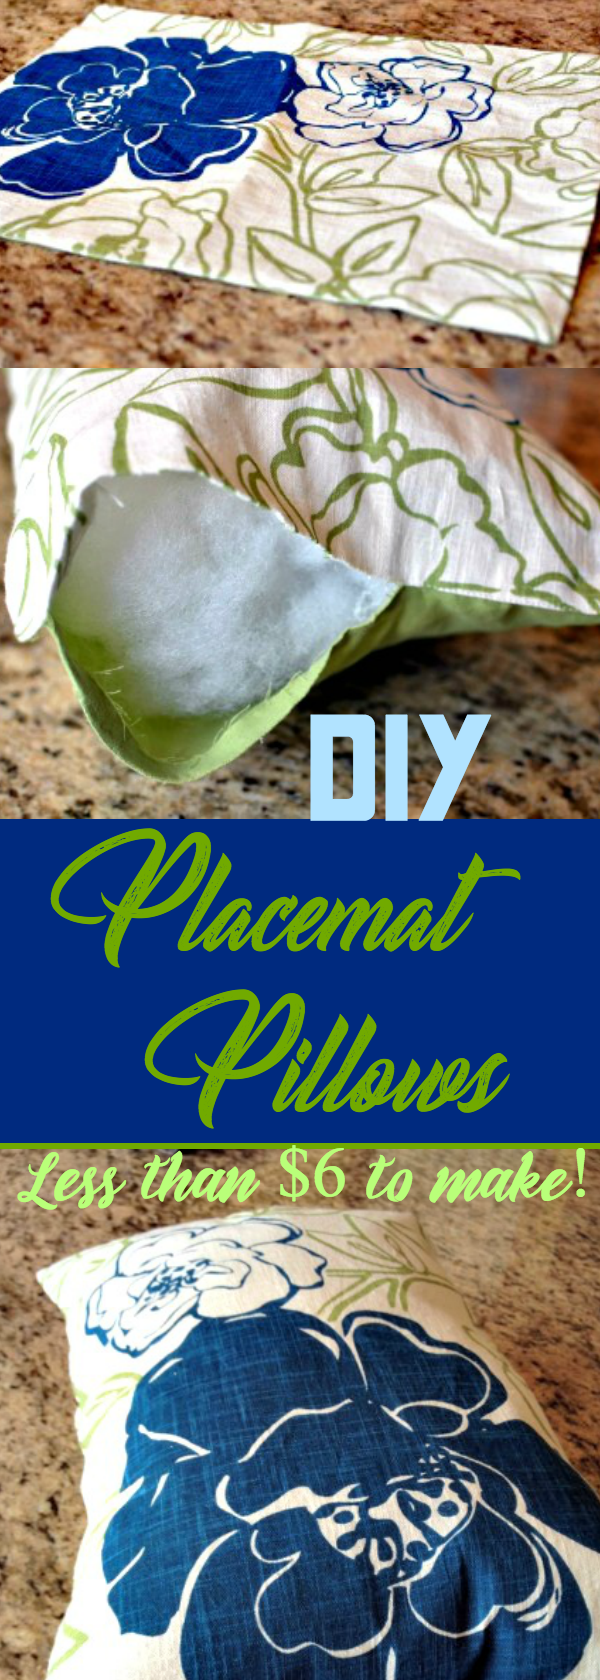 These DIY placemat pillows are so easy to make, and they cost less than $6 each!